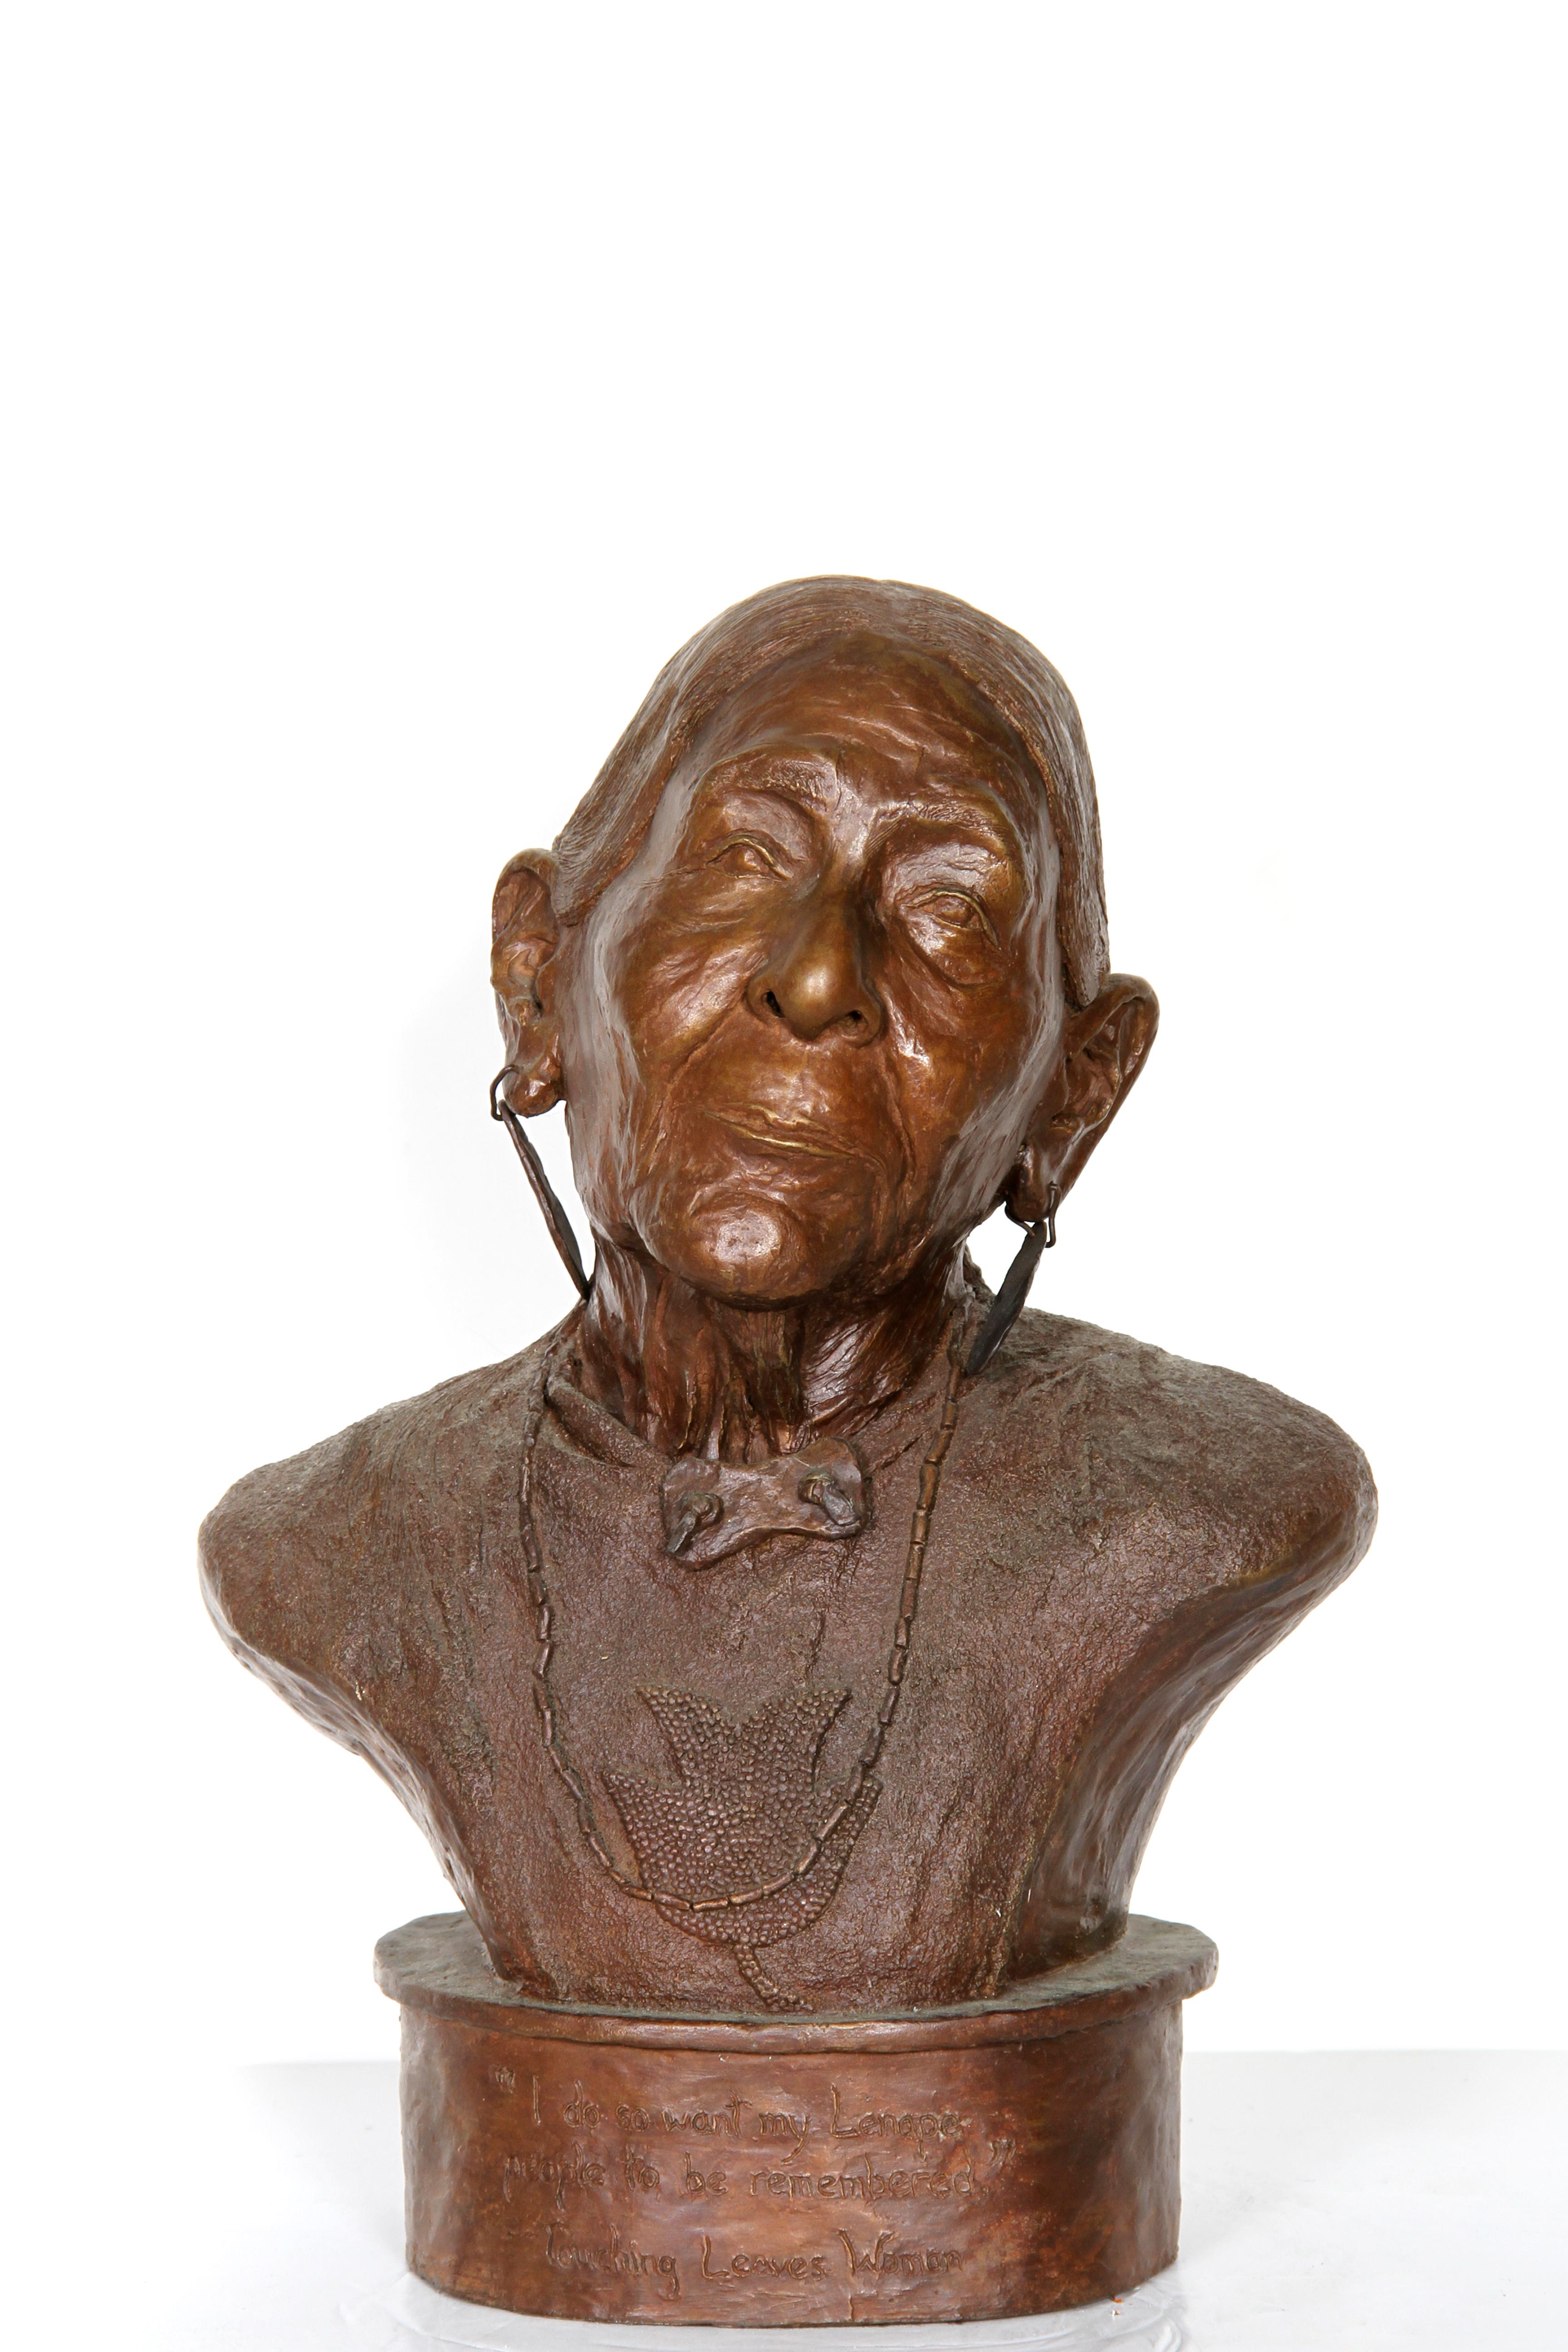 "Touching Leaves Woman", 1988, Bronze Sculpture by Paul Oestreicher